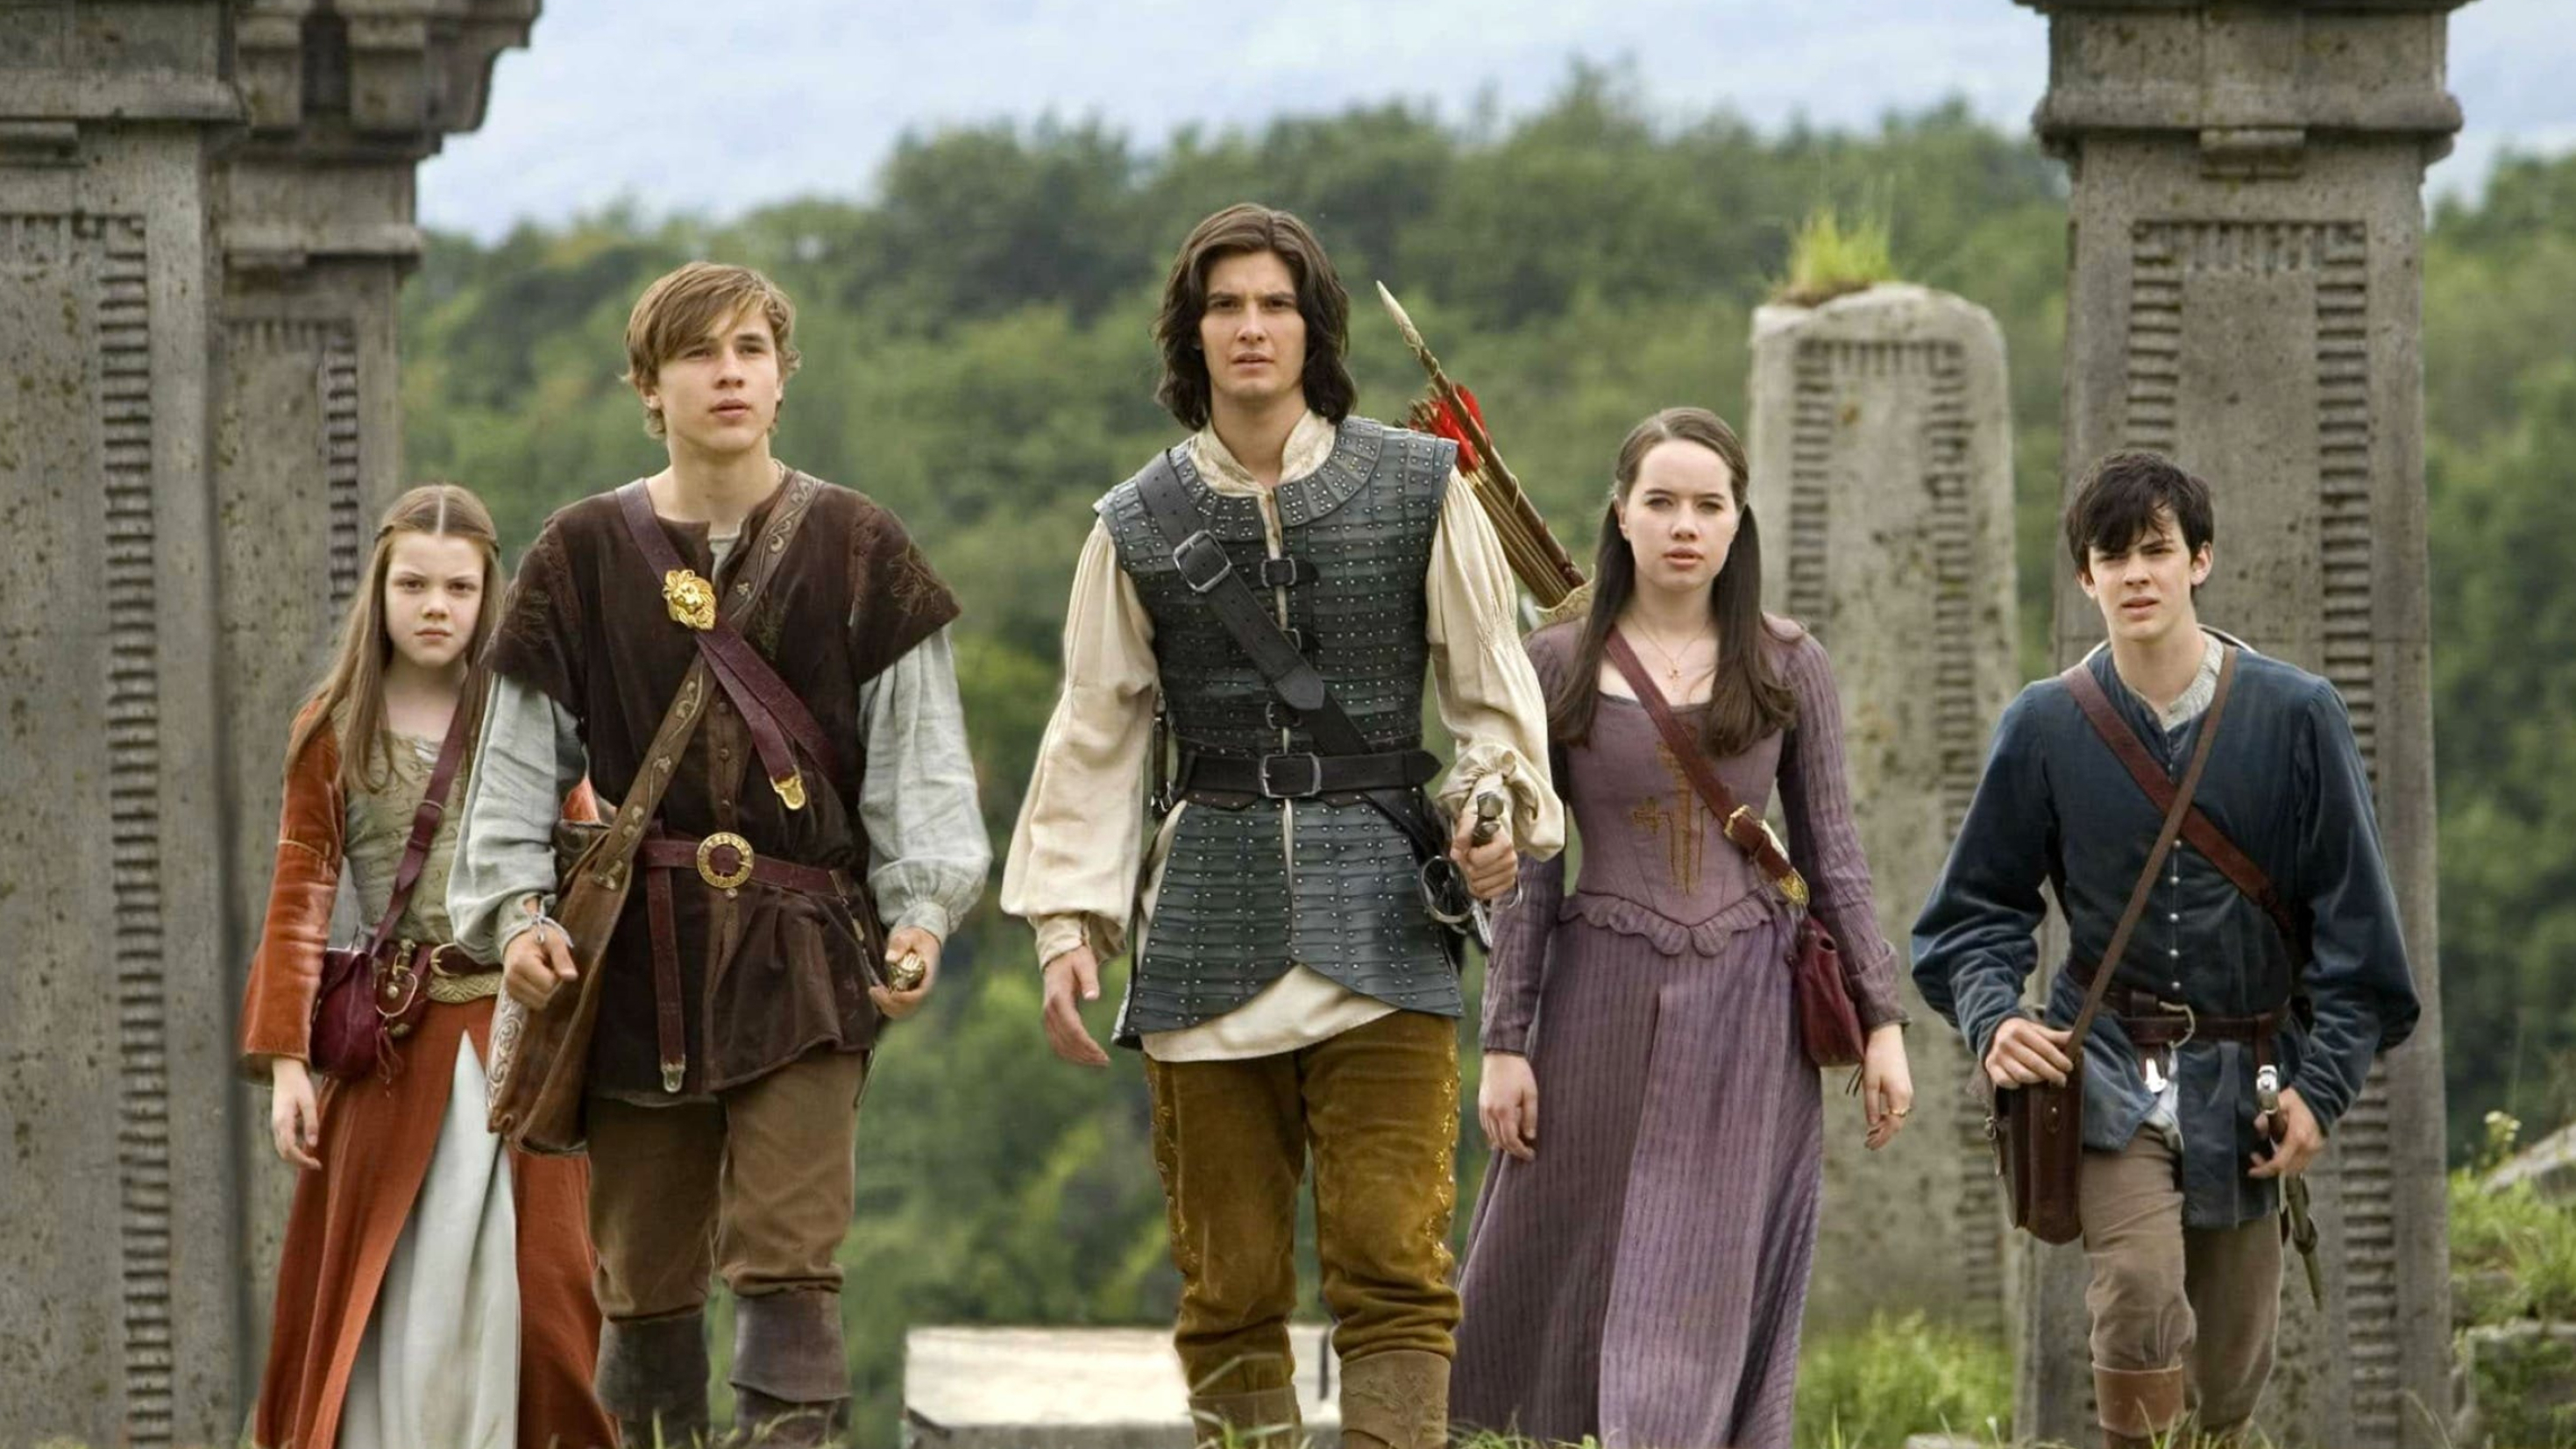 Chronicles of Narnia: Prince Caspian, Soundtrack music, Complete song list, Tunefind, 2940x1660 HD Desktop